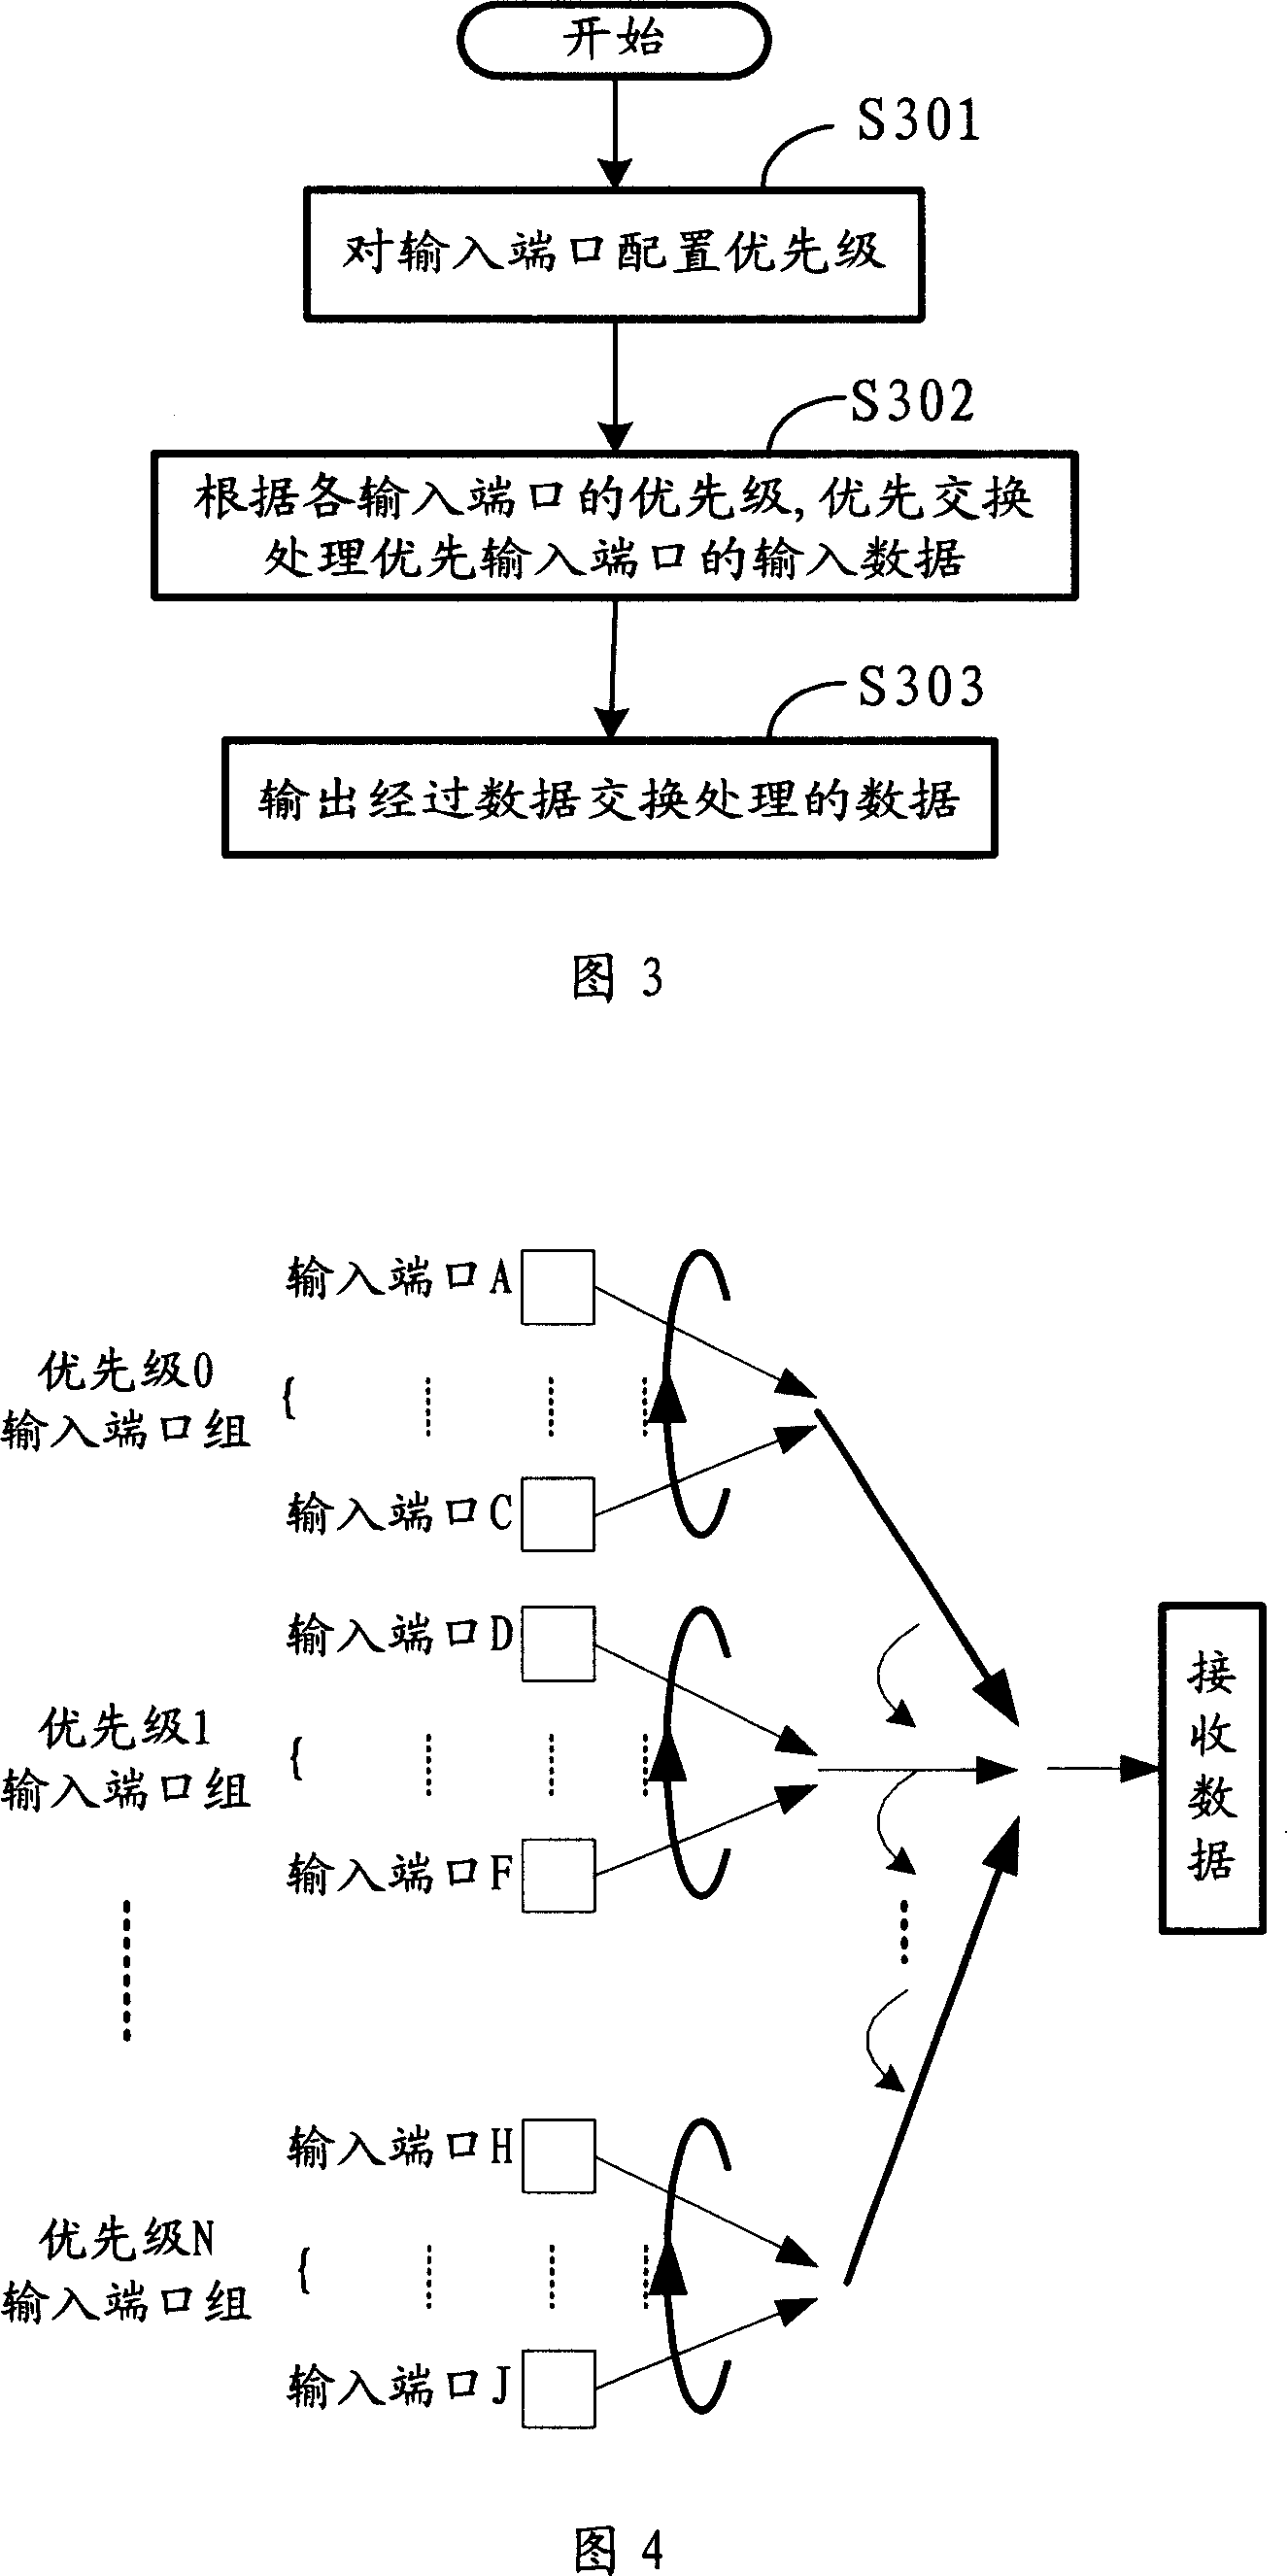 A network data processing method and device